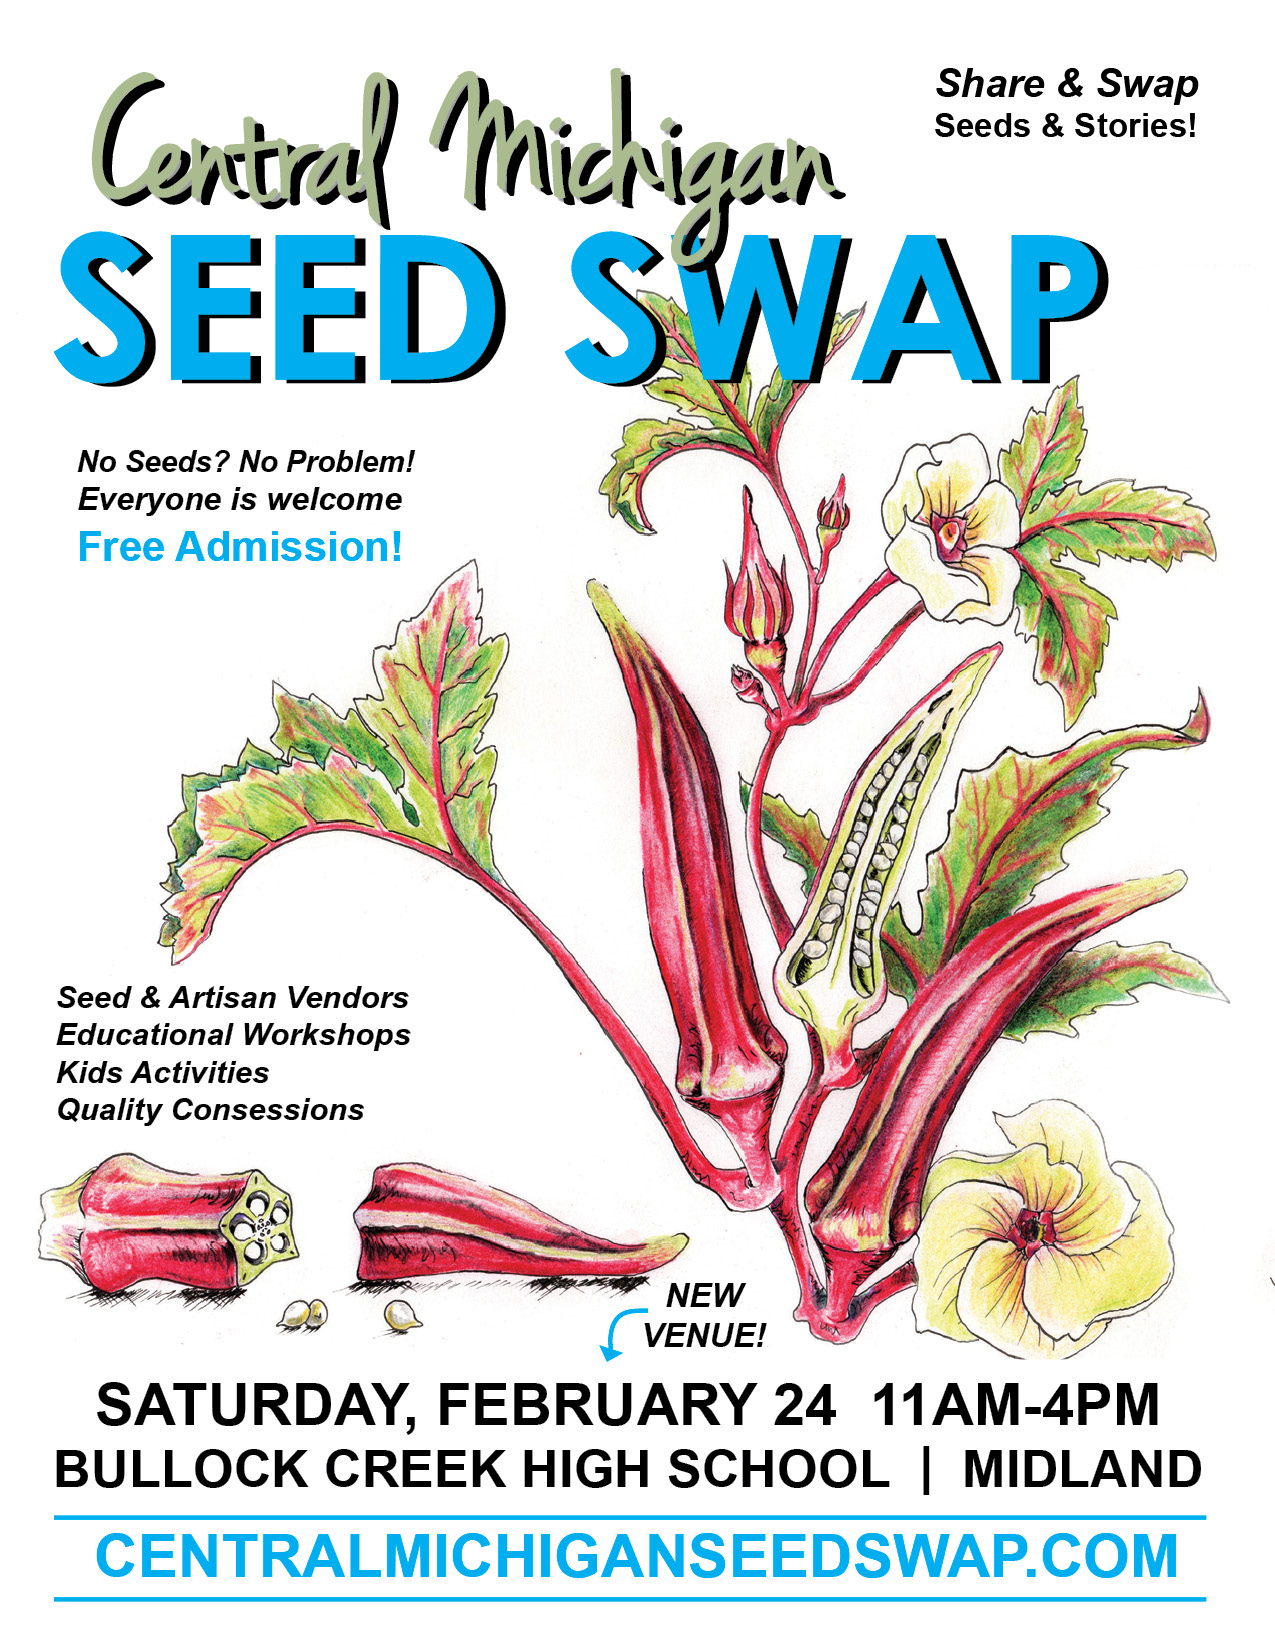 Central Michigan Seed Swap February 24 11Am-4PM